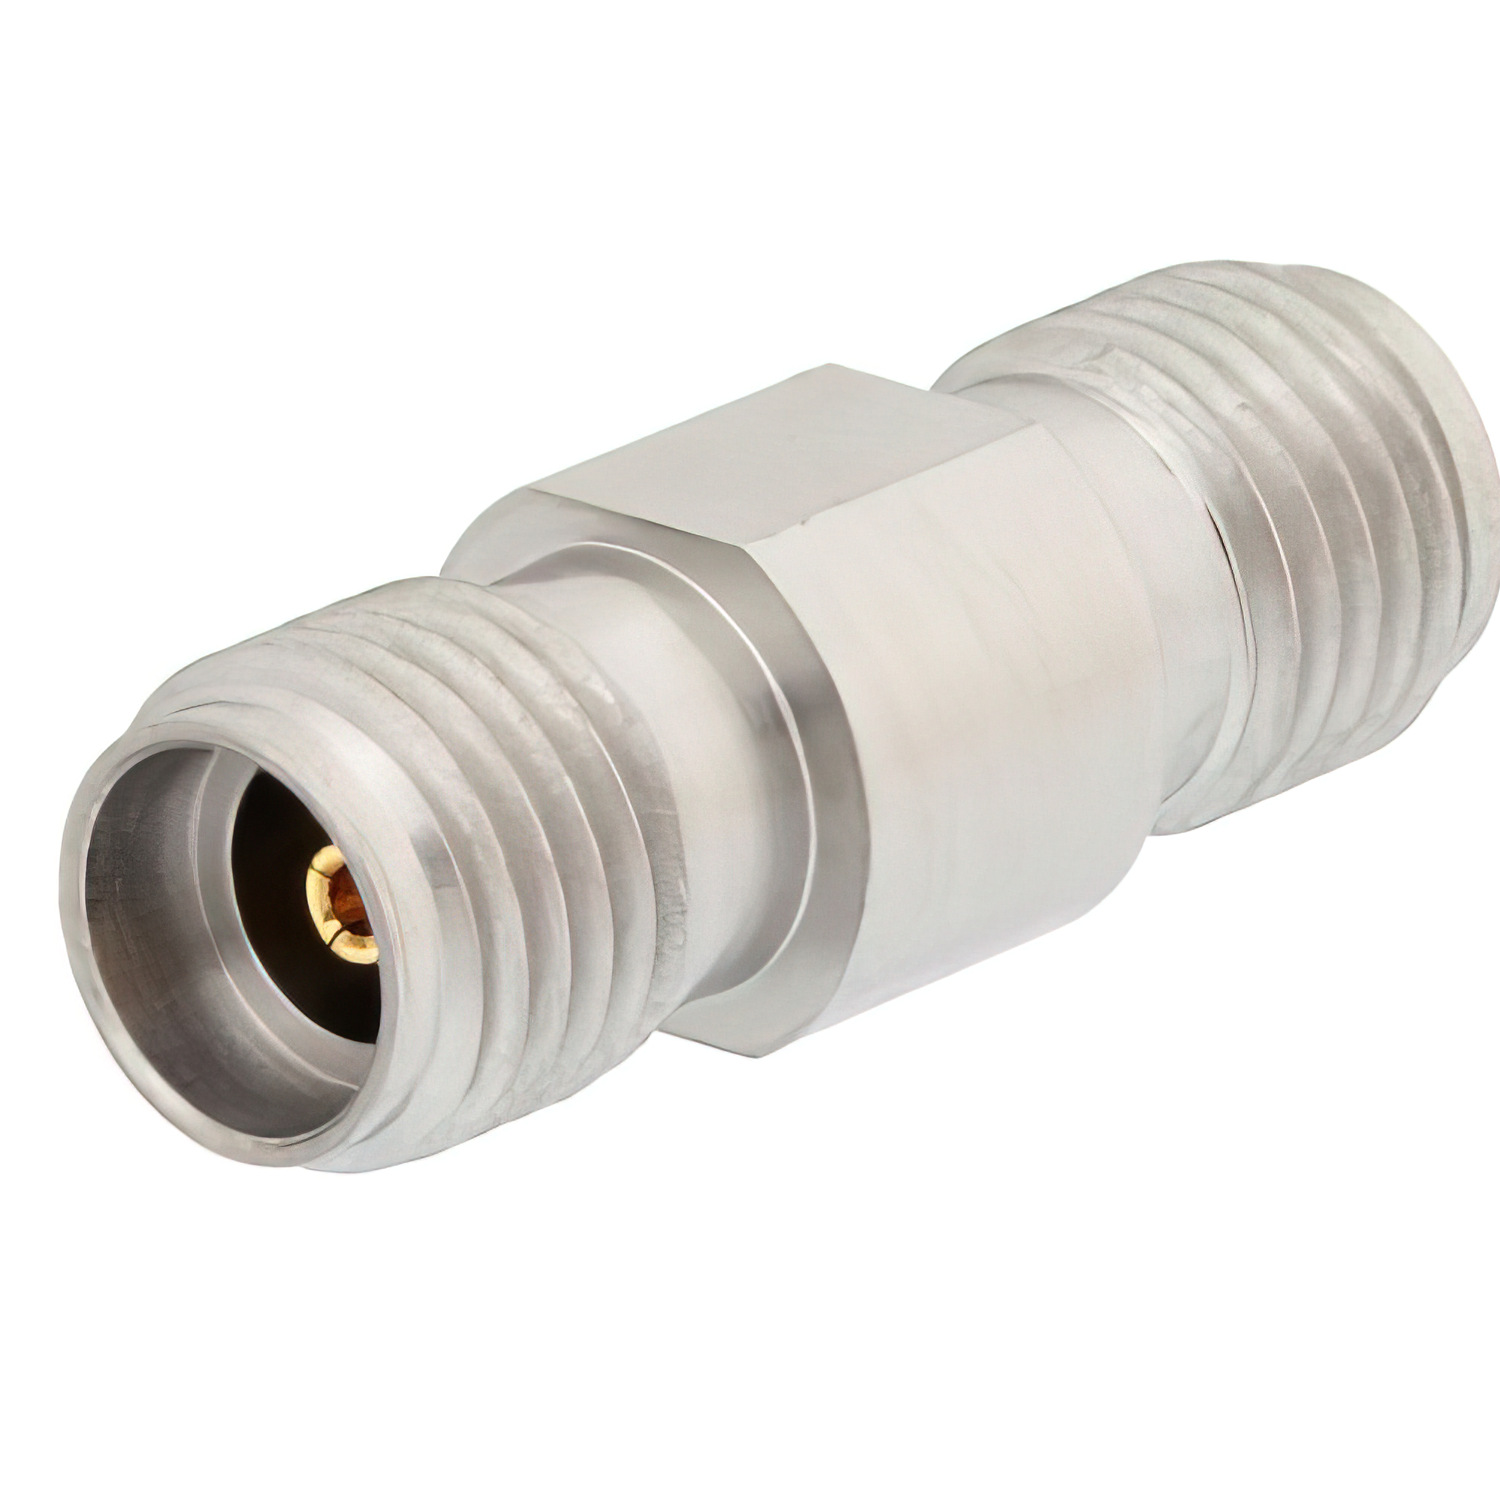 2.92mm Female to 3.5mm Female Adapter1